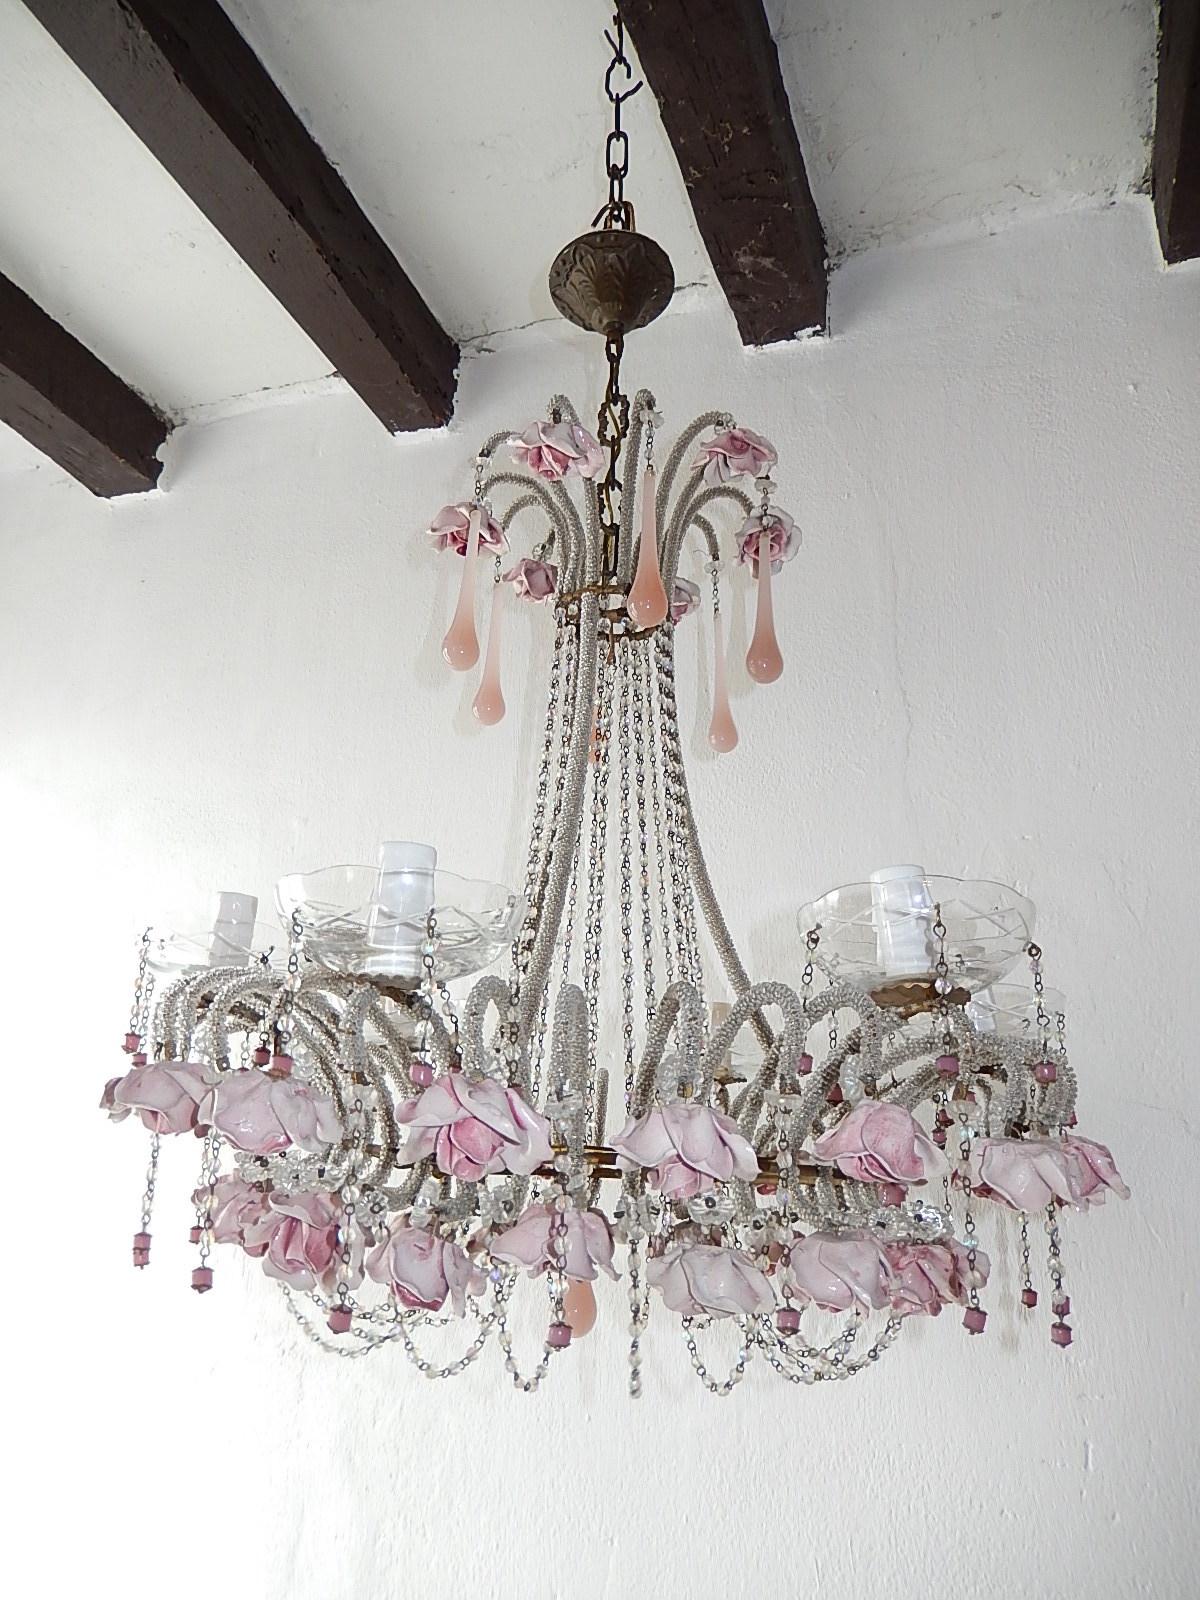 Housing six-light, will be rewired and ready to hang with correct sockets for country. Crystal bobèche dripping with crystal prisms and rare pink opaline encaged beads. Micro beaded throughout. Swags of iridescent beads. Adorning pink handmade